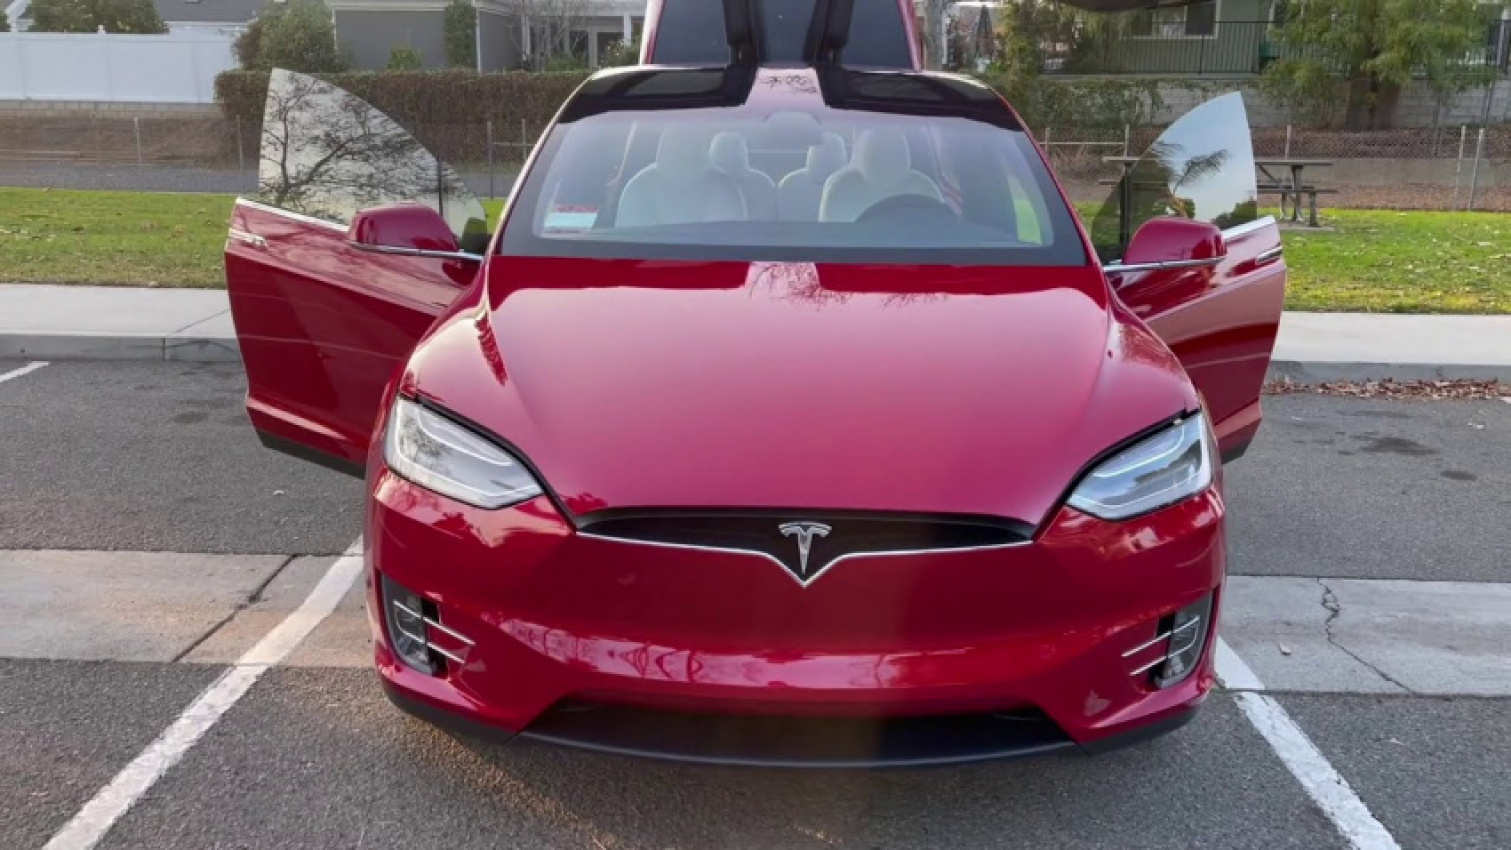 autos, cars, tesla, 2021 tesla, 20inch rims, 371 mile, 371 mile range, 6 seat, 6 seater, brand new, brand new car, falcon door, falcon wing doors, fast, fast and furious, first, first tesla, flying suv, long range, long range plus, mileage, model, model x, range, red exterior, red tesla, six seater, tesla model x, walkthrough, white, white interior, wing, wings, wireless charge, x tesla, 2021 red tesla six seater model x walkthrough! (my first tesla)